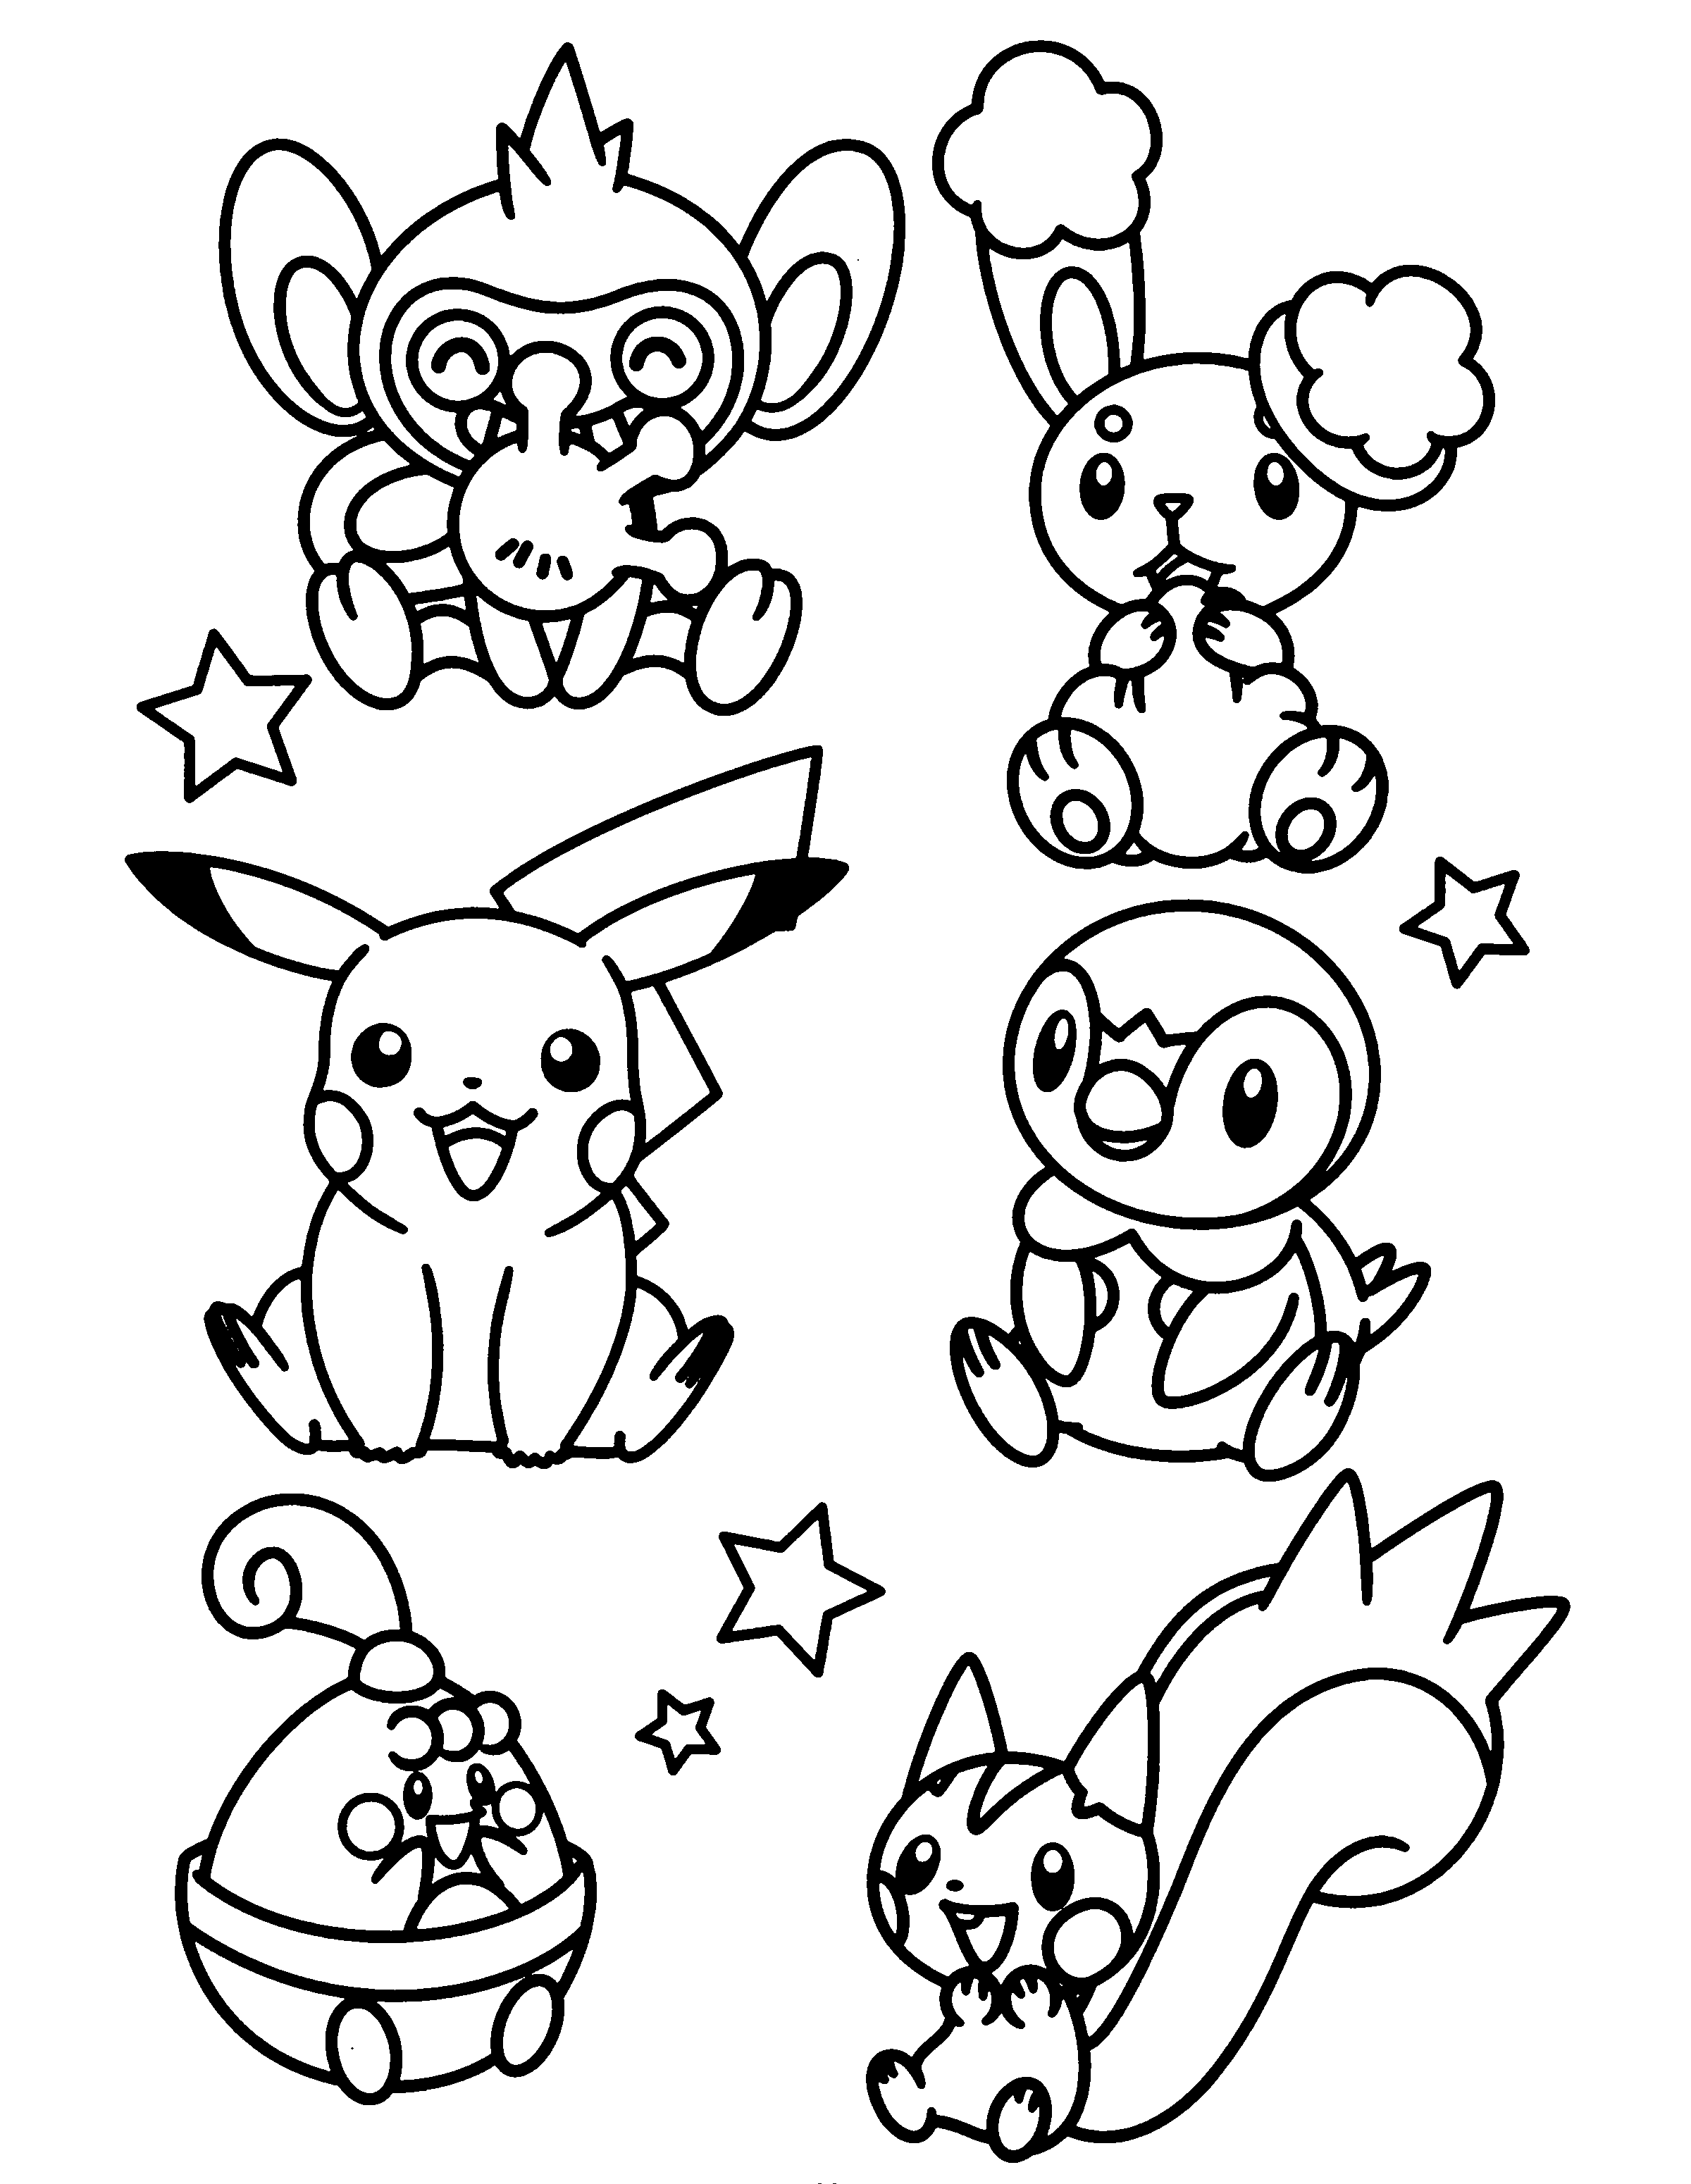 Piplup Coloring Page Coloring Pages For Kids And For Adults Coloring Home